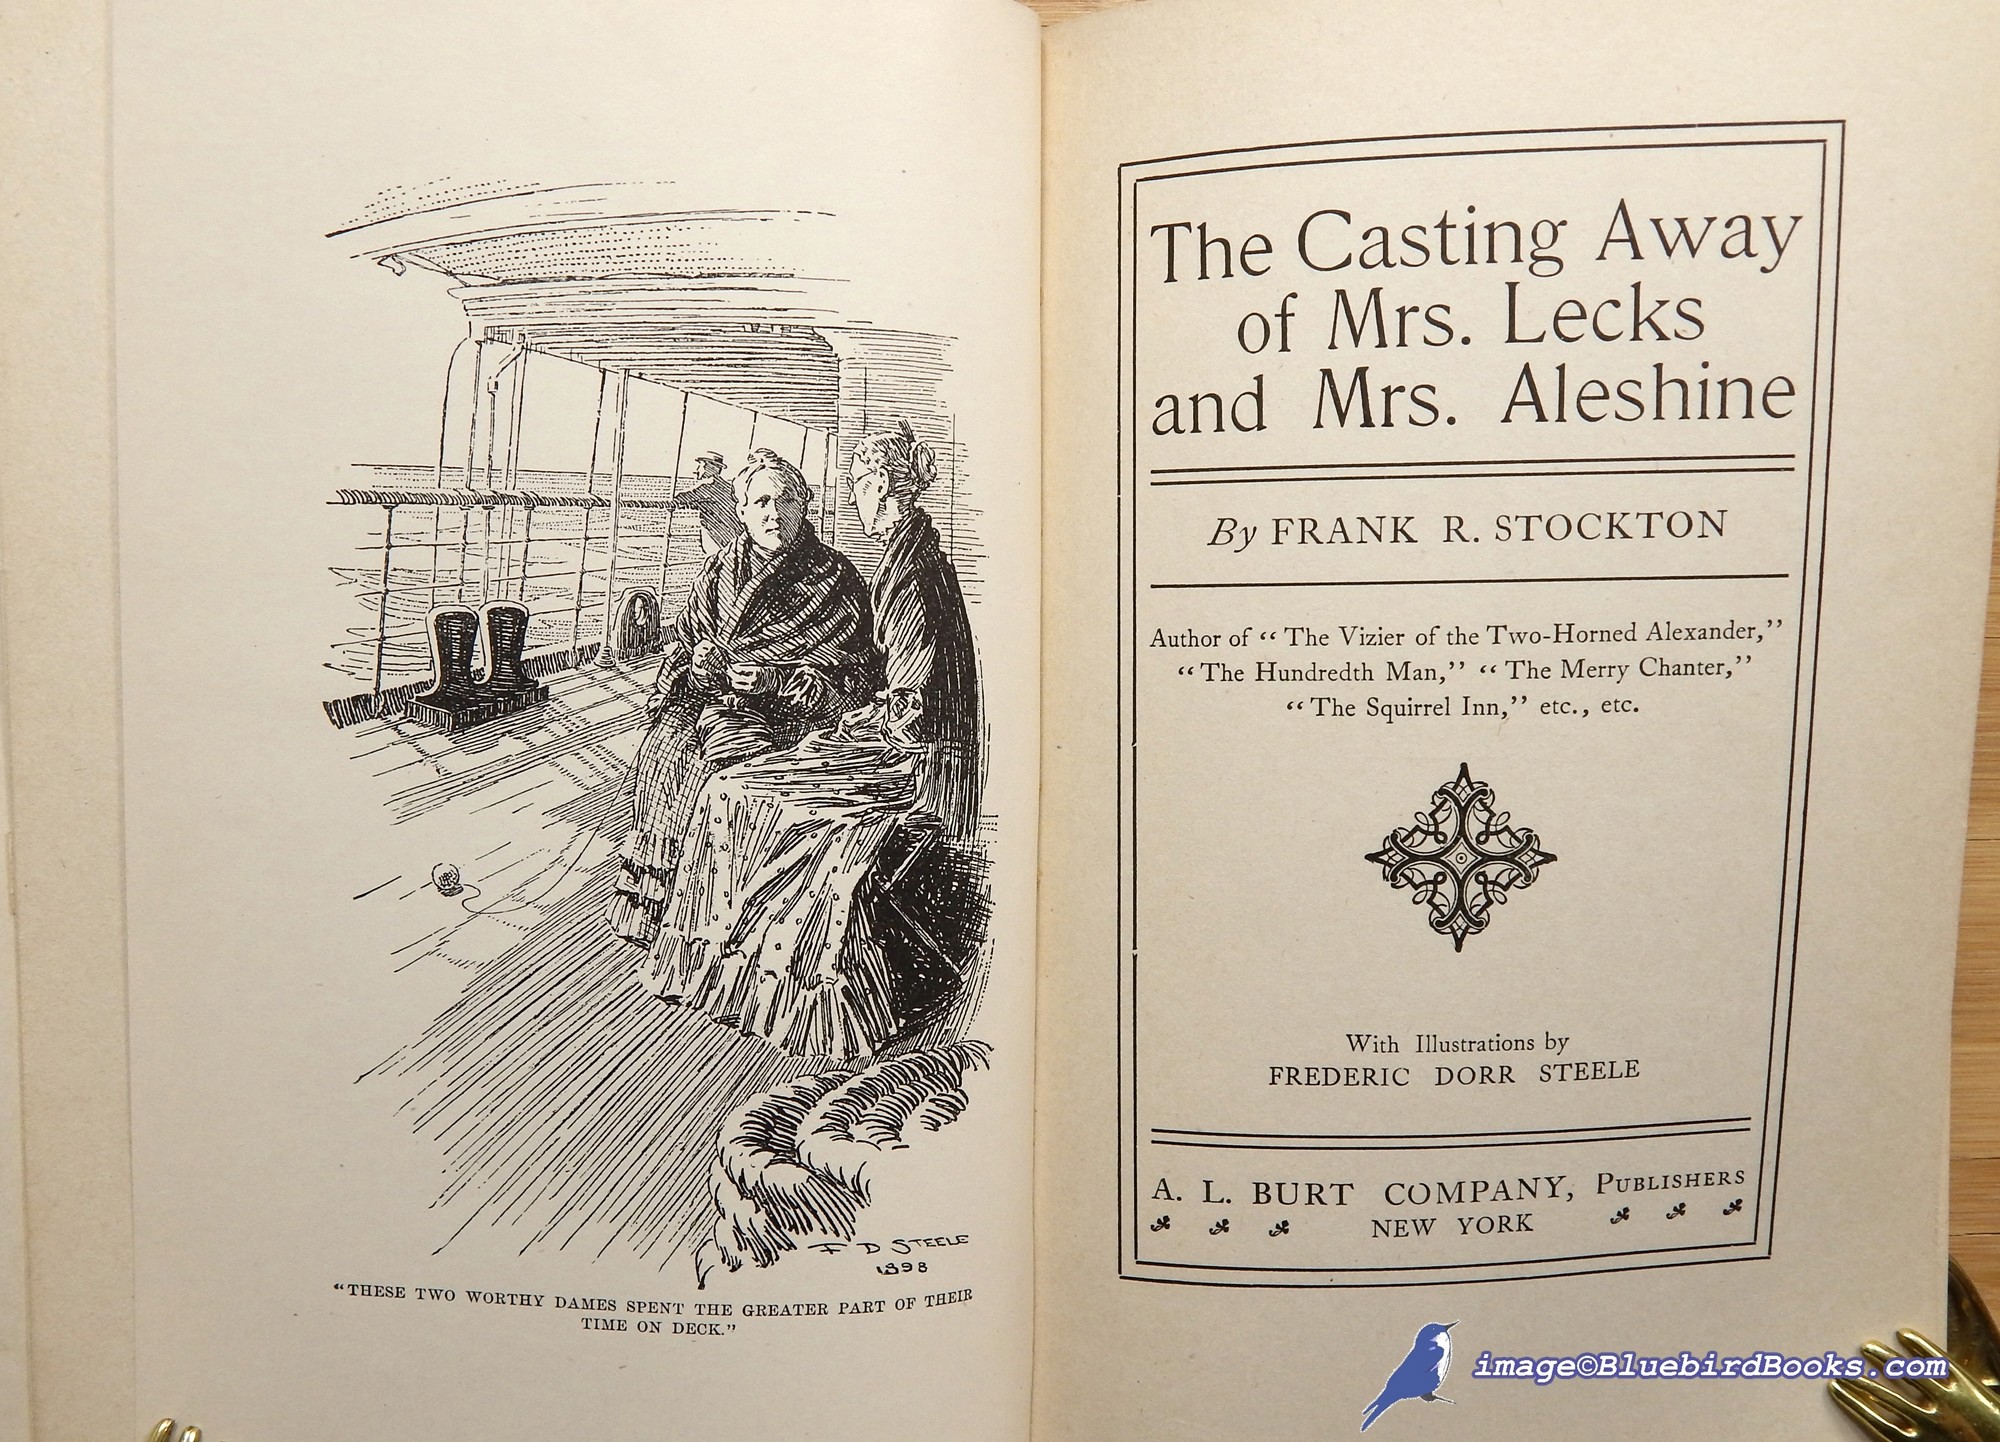 STOCKTON, FRANK R. (AUTHOR); STEELE, FREDERIC DORR - The Casting Away of Mrs. Lecks and Mrs. Aleshine